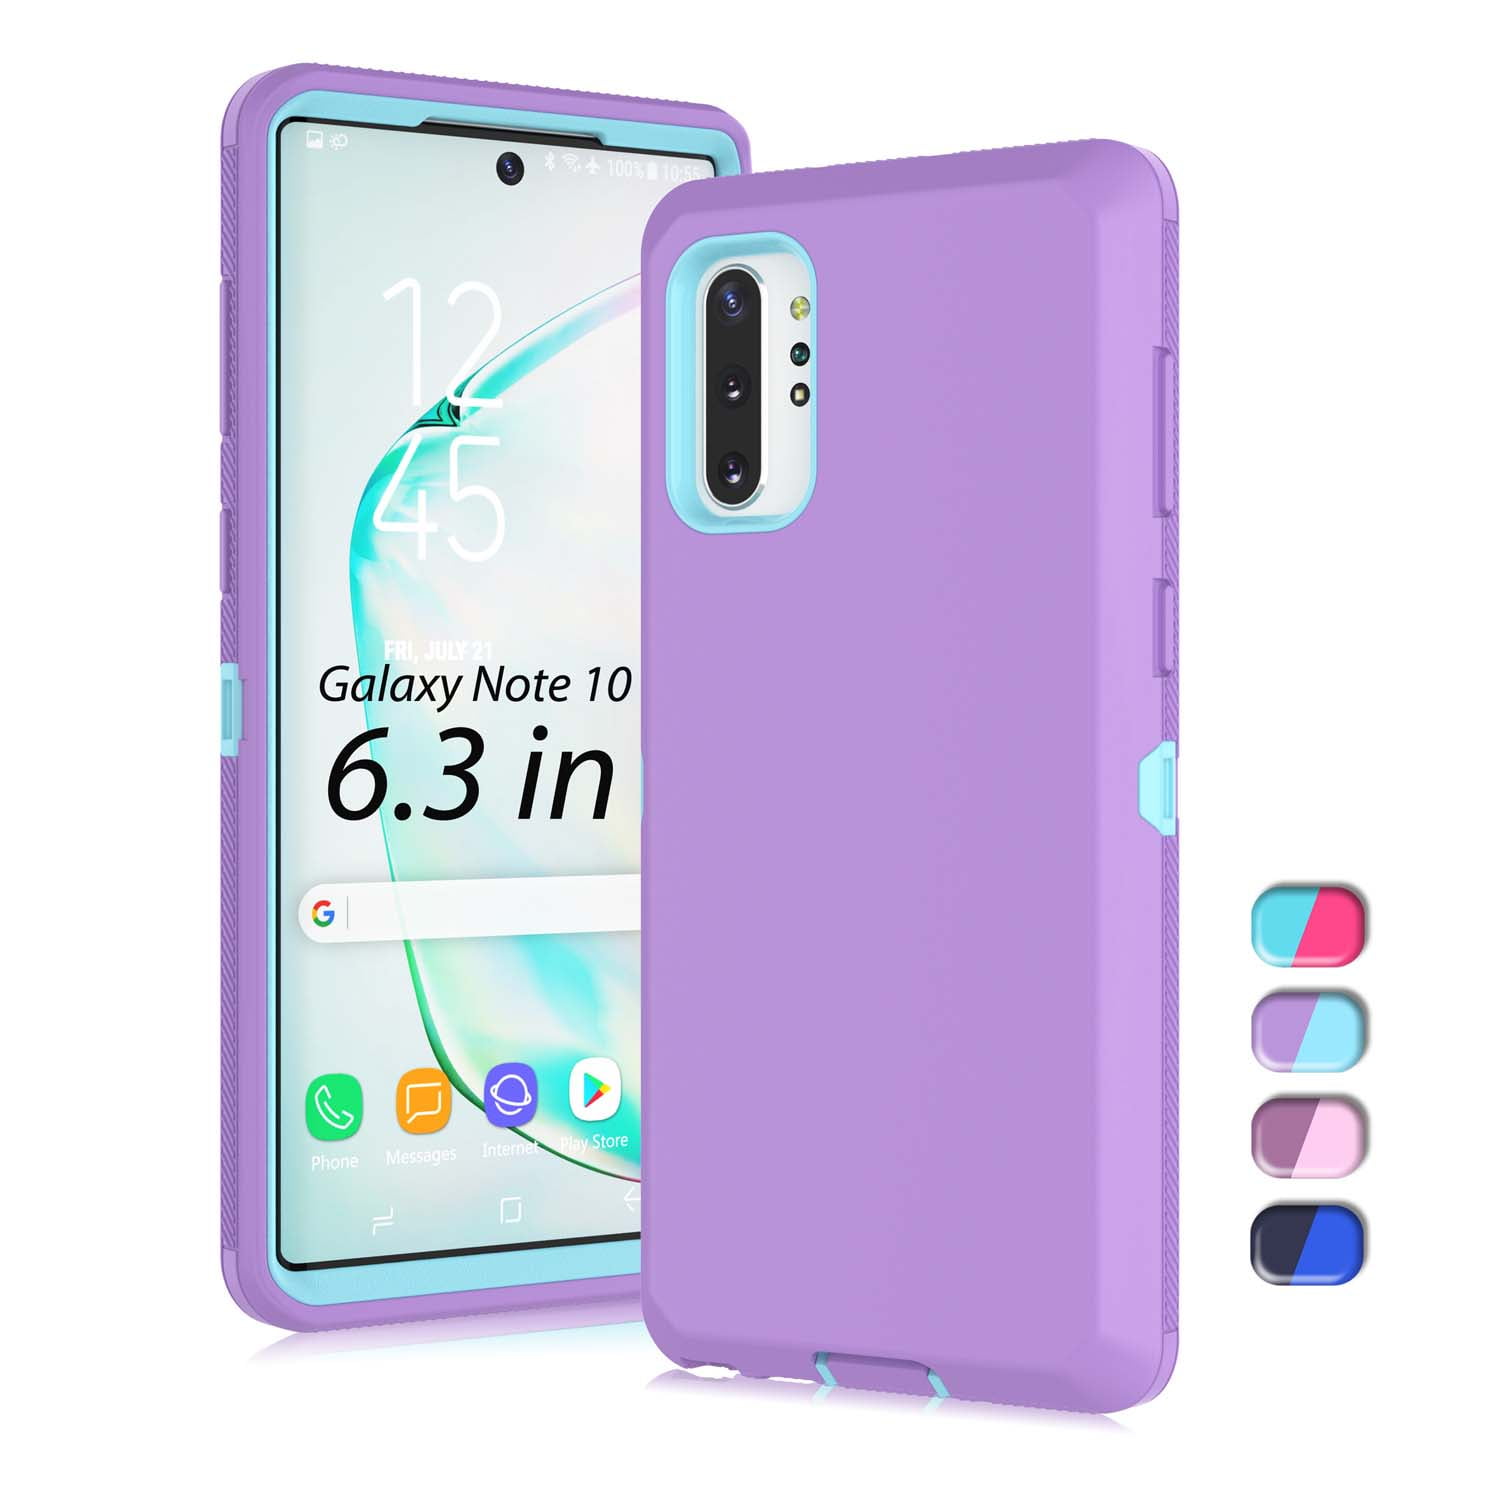 Samsung Galaxy Note 10+ 5G 10 10 Plus Case, Tekcoo Full Body Sturdy  [Tempered Glass Screen Protector] Grip Plastic TPU Slim Transparent Clear  Phone Protective Hard Cases Cover 